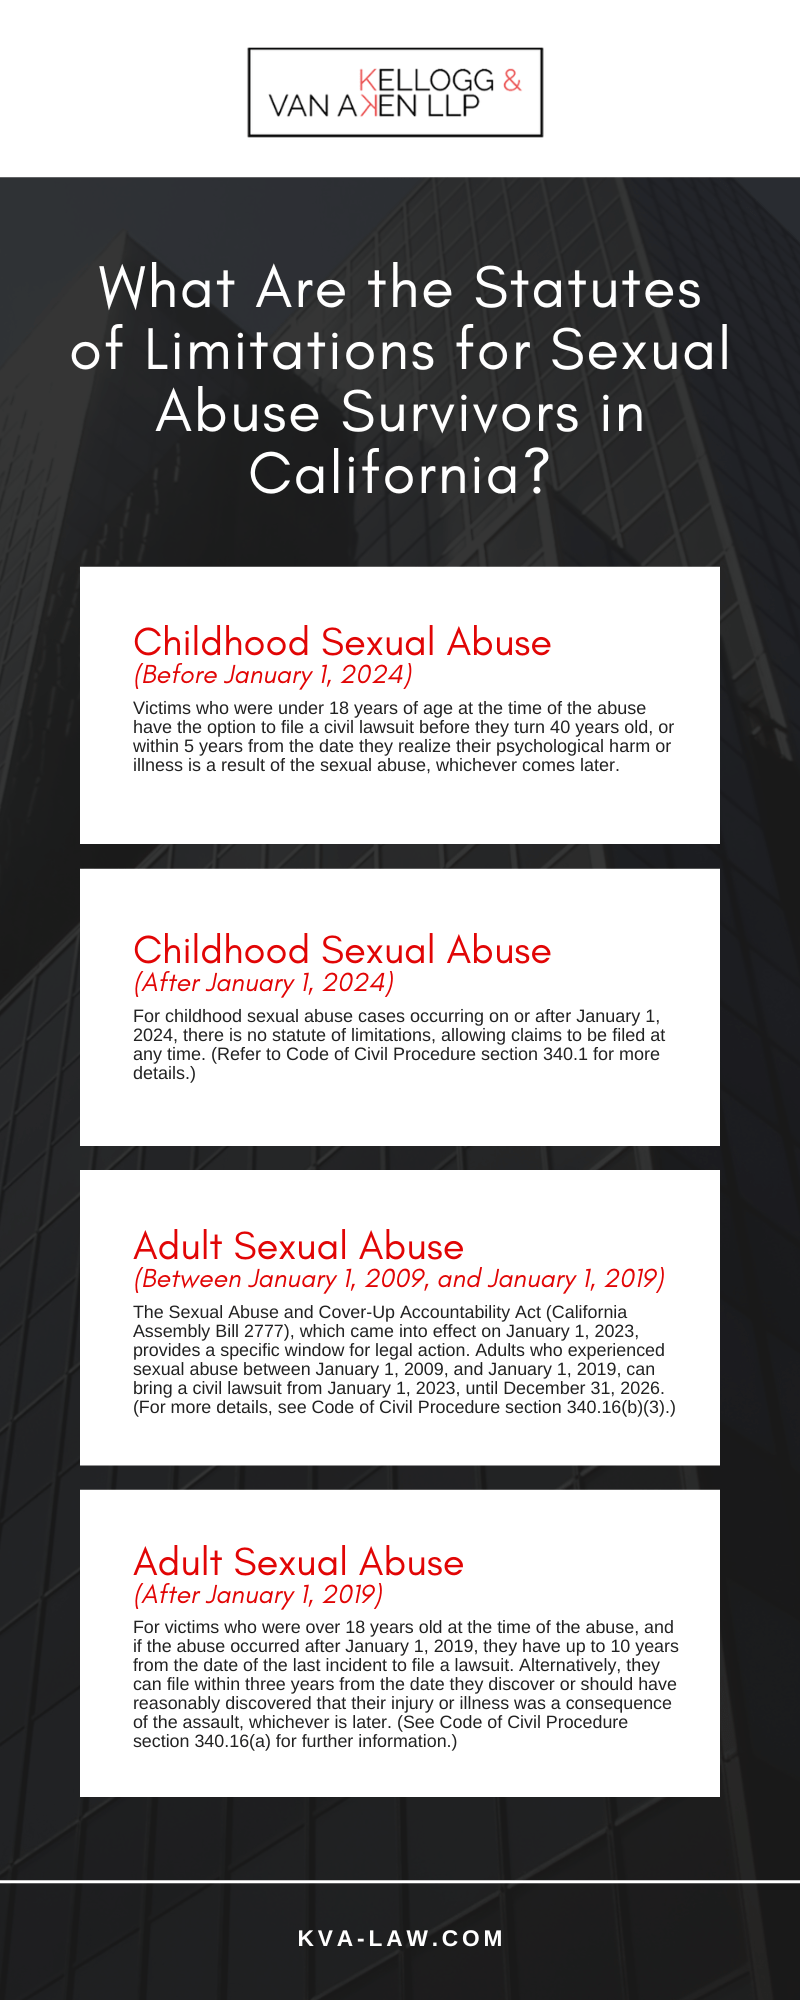 What Are the Statutes of Limitations for Sexual Abuse Survivors in California Infographic